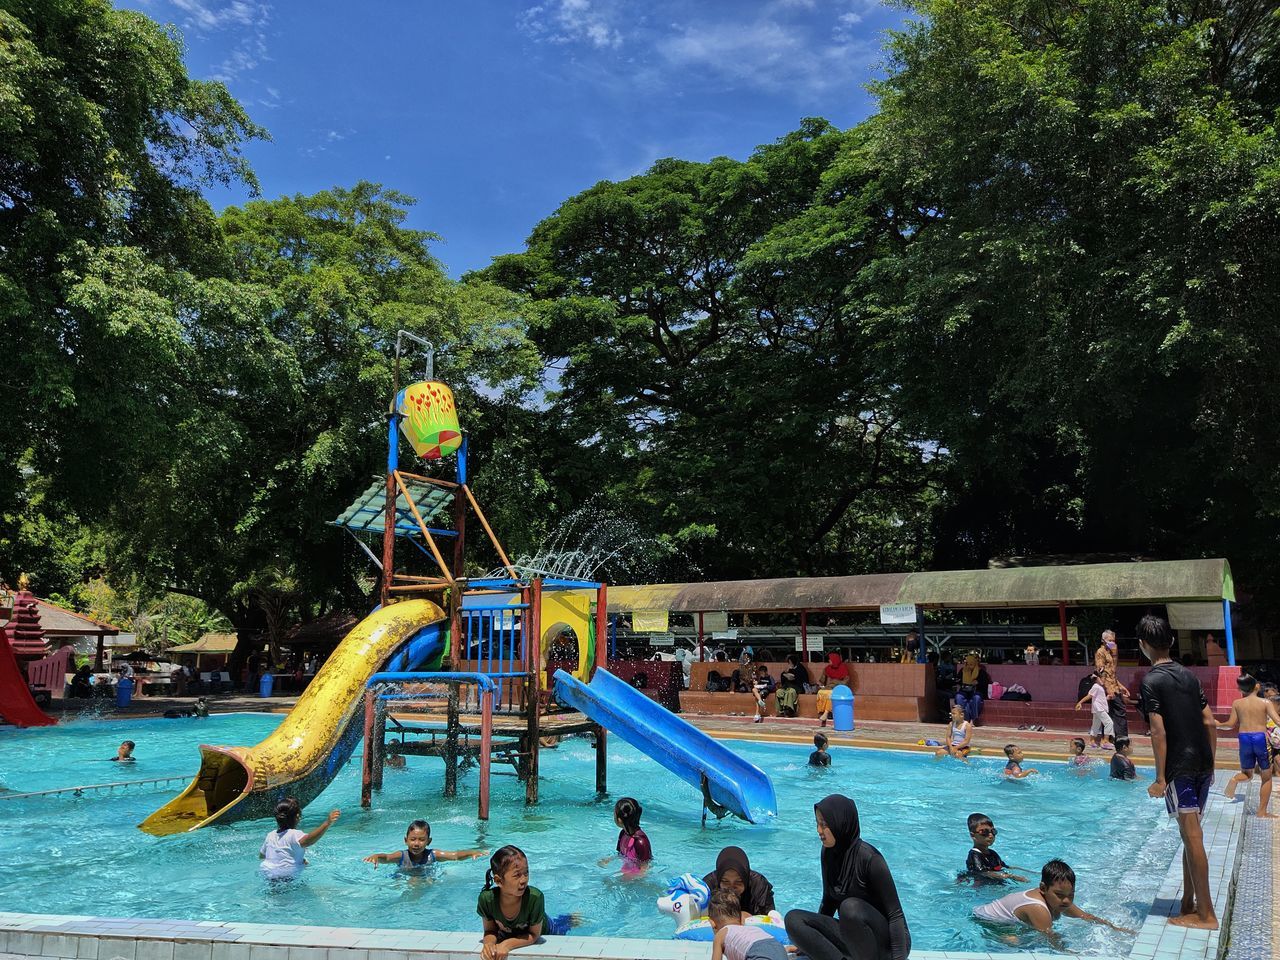 park, water park, tree, amusement park, group of people, crowd, large group of people, nature, plant, water, recreation, swimming pool, leisure activity, swimming, enjoyment, lifestyles, fun, women, men, sports, day, adult, outdoors, holiday, childhood, person, trip, vacation